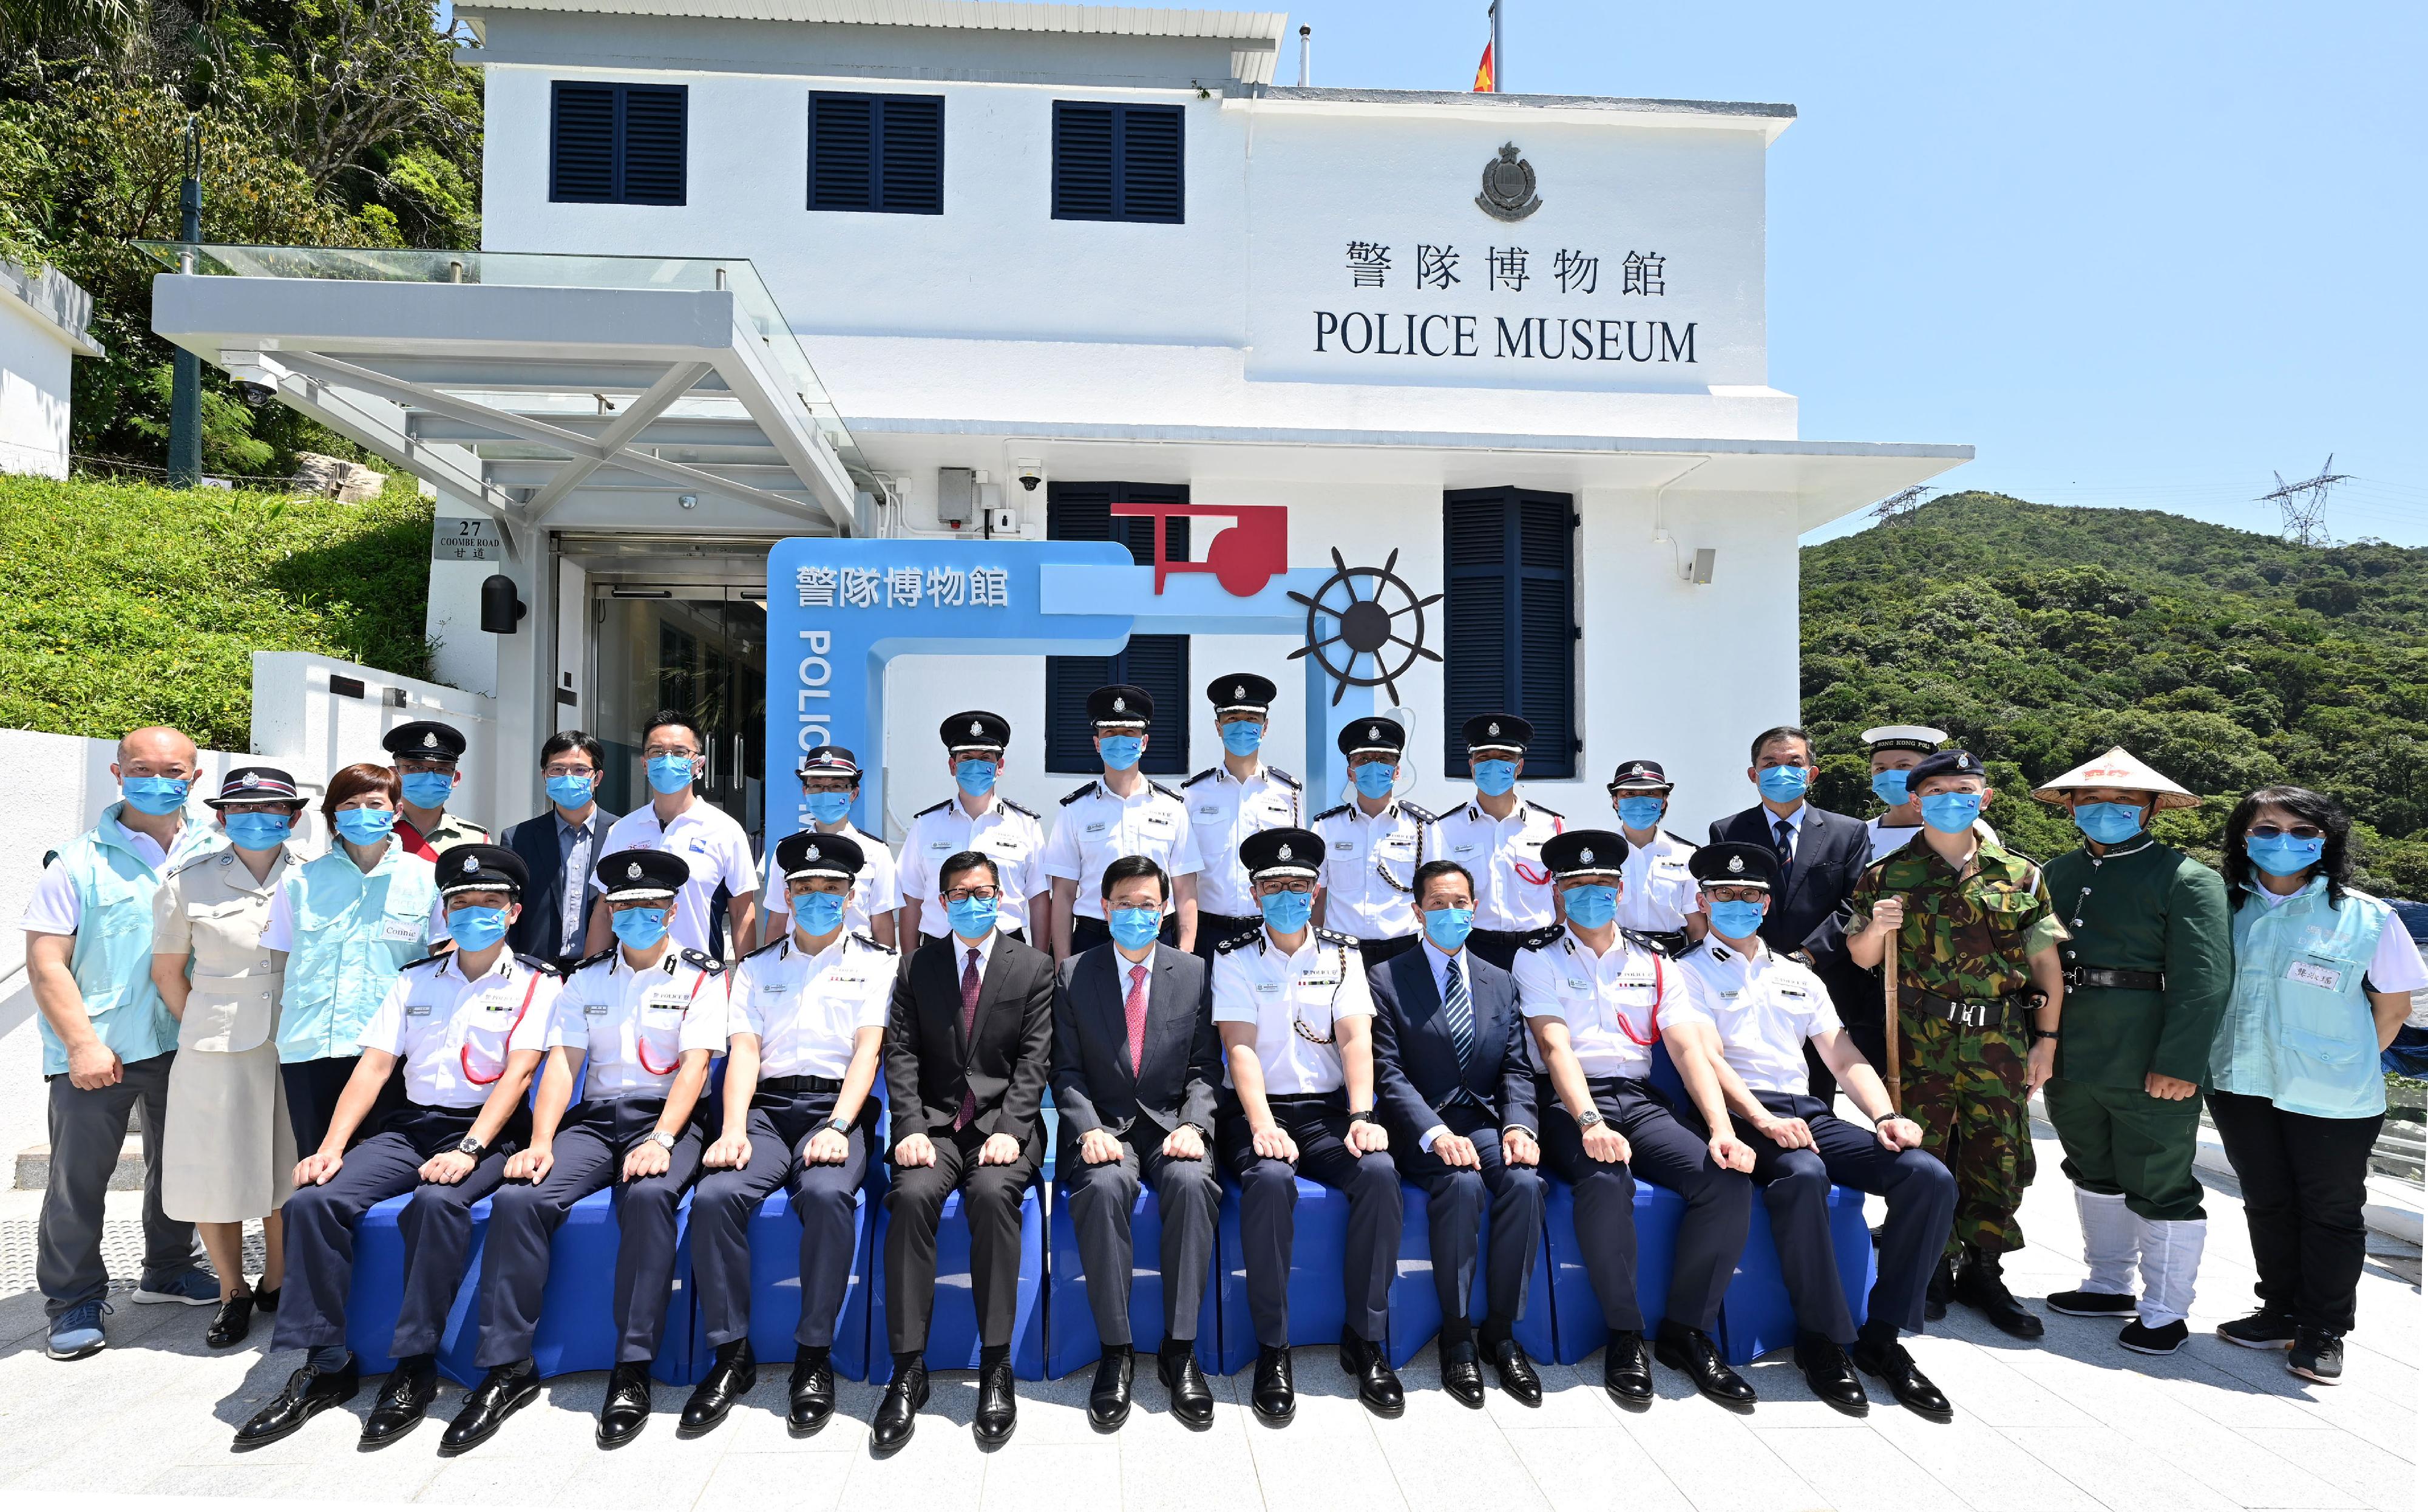 The Reopening Ceremony of Police Museum was held today (September 9). Photo shows the Chief Executive, Mr John Lee (front row, centre); the Secretary for Security, Mr Tang Ping-keung (front row, fourth left); the Commissioner of Police, Mr Siu Chak-yee (front row, fourth right) and honorable guest, Mr Tang Yat-sun (front row, third right) taking a group photo with police officers and docent volunteers in front of the museum.